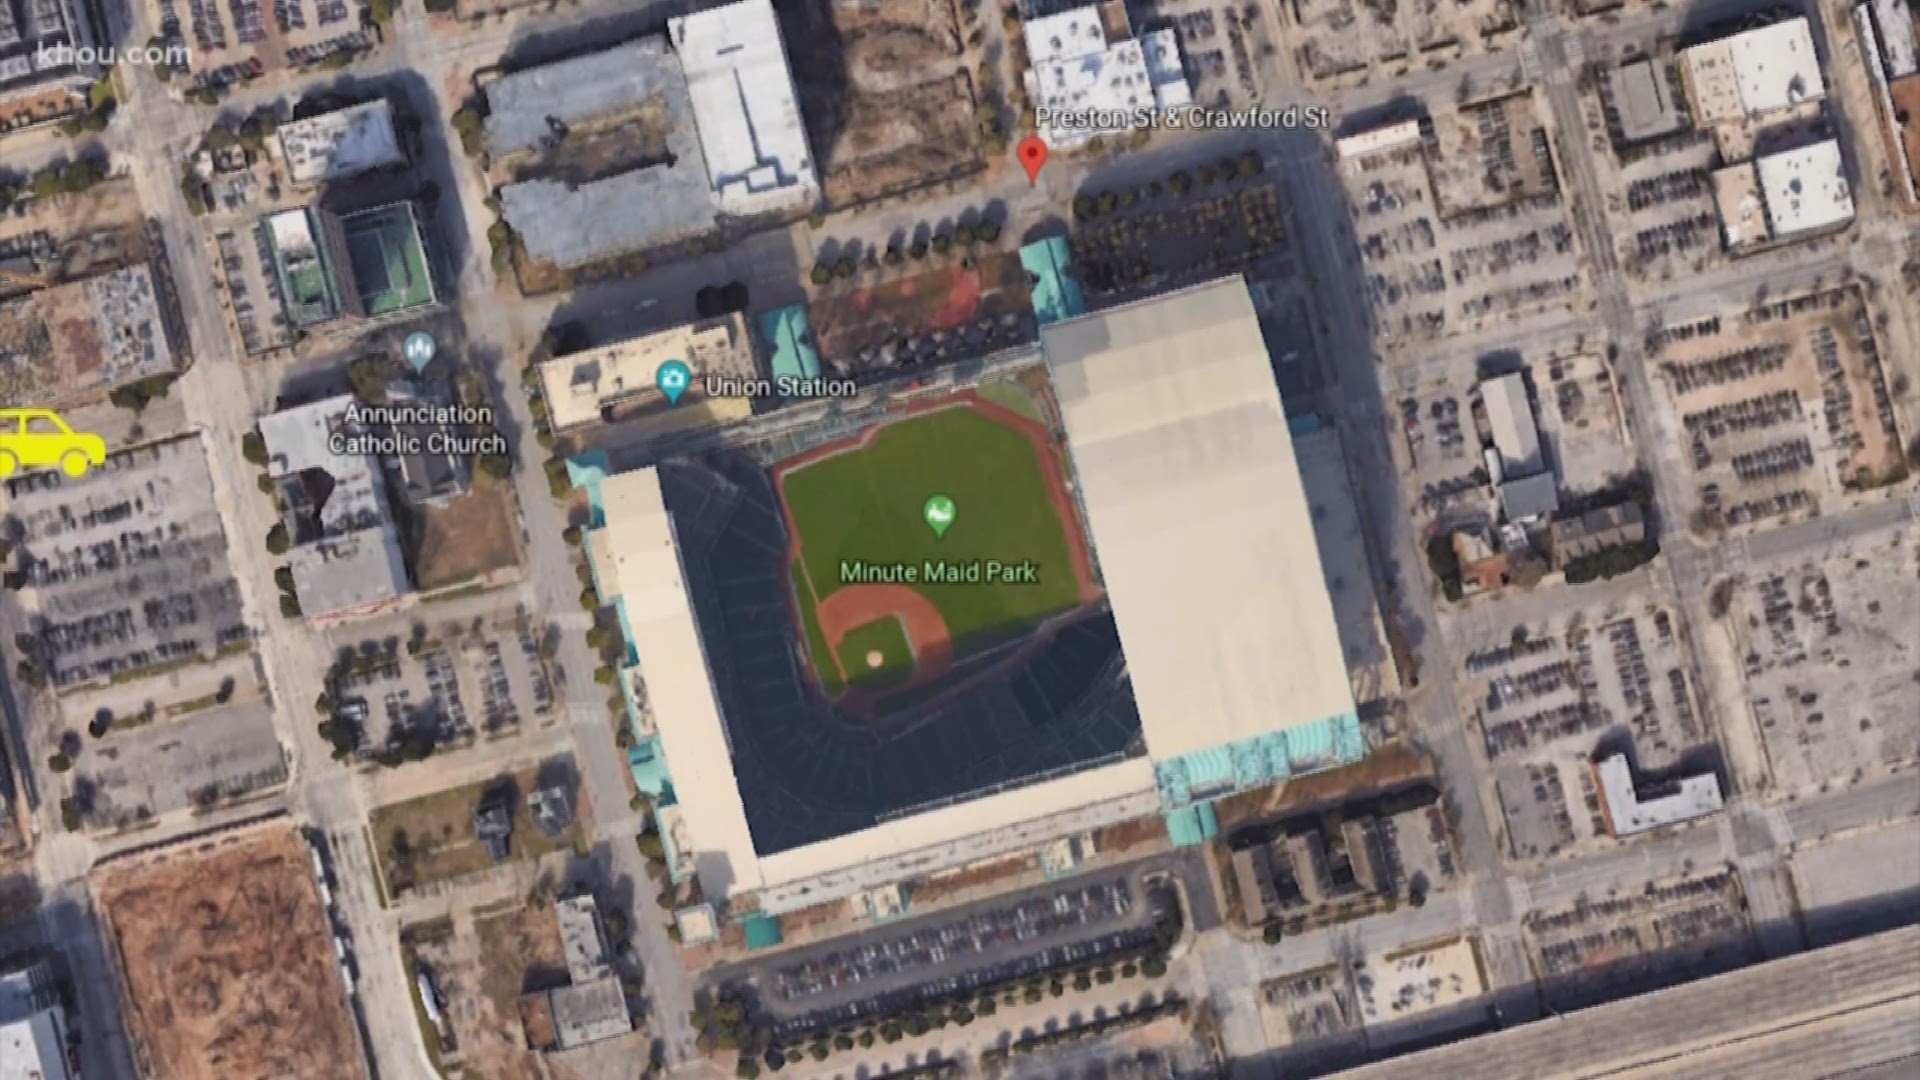 We know you’re excited for Astros game day, but if you don’t think ahead, you may strike out when it comes to parking around Minute Maid Park.